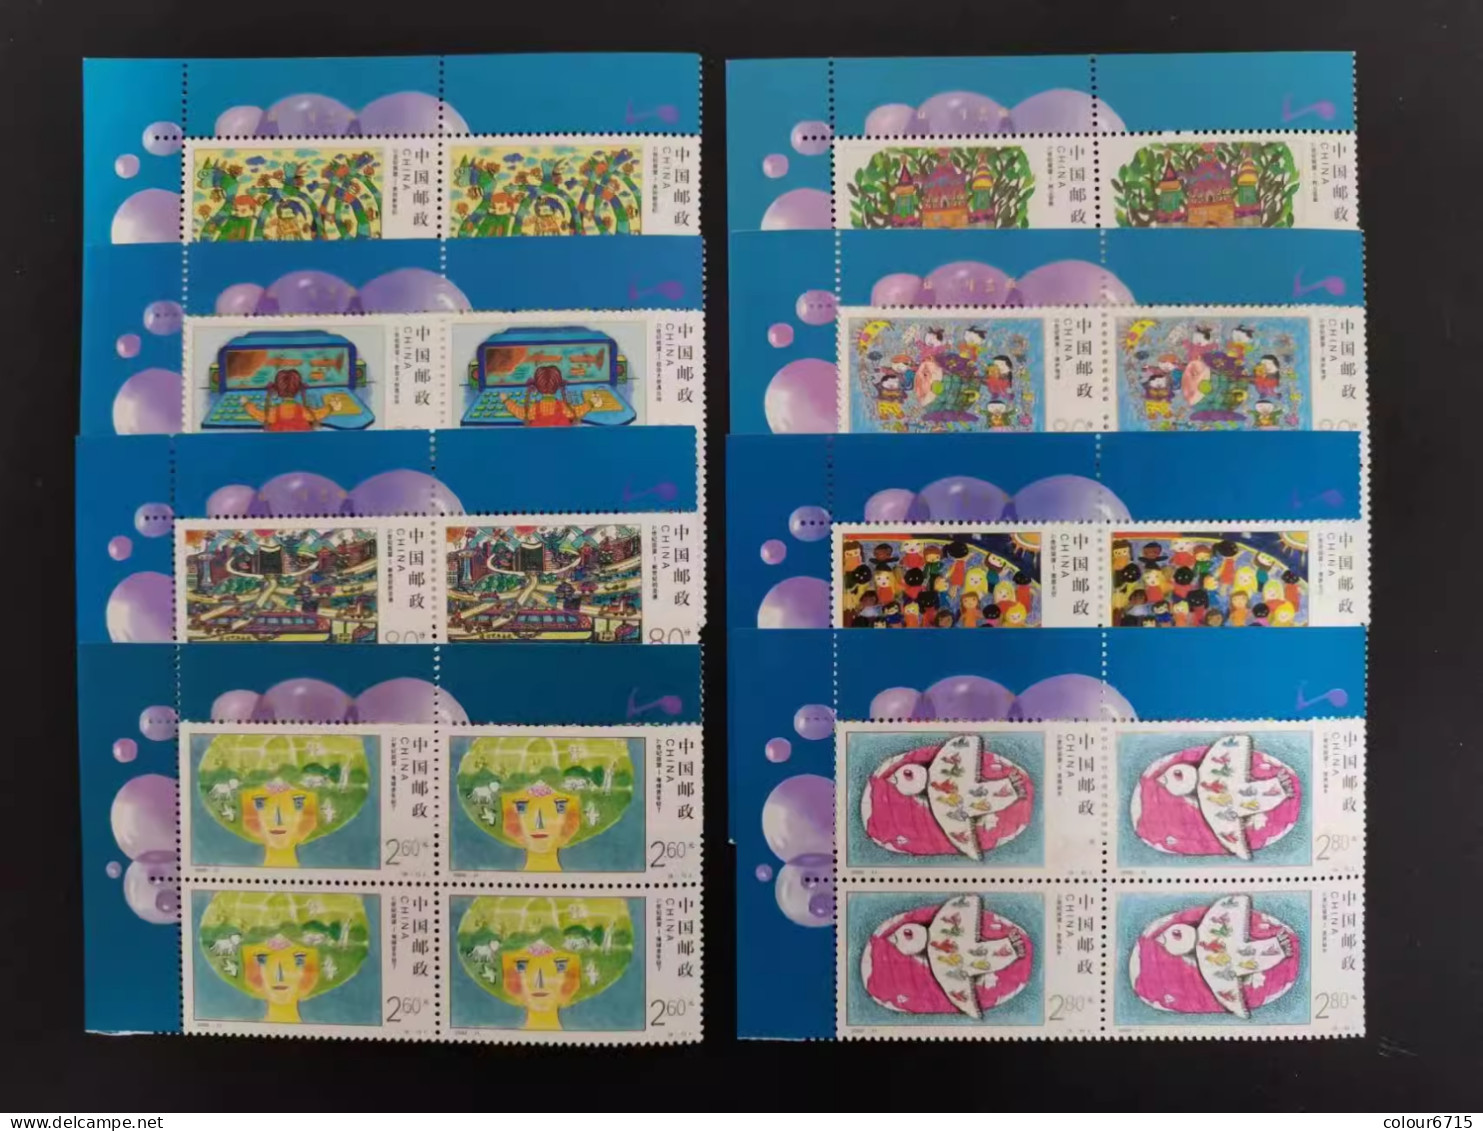 China 2000/2000-11 New Millennium.Children's Paintings Stamps 8v Block Of 4 MNH - Nuevos